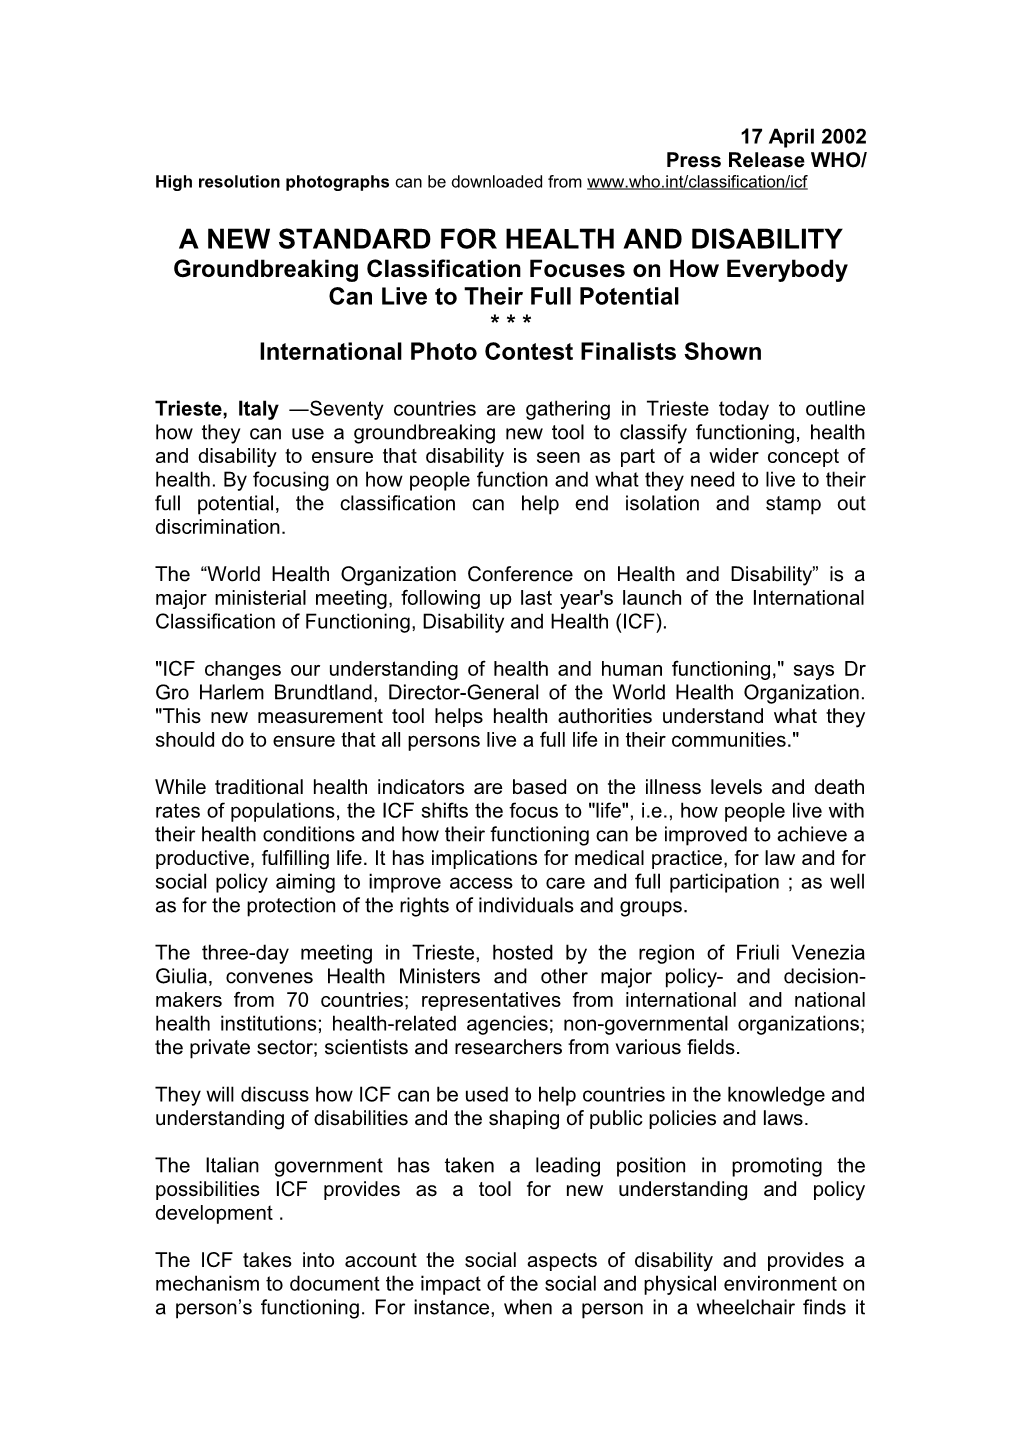 A New Standard for Health and Disability